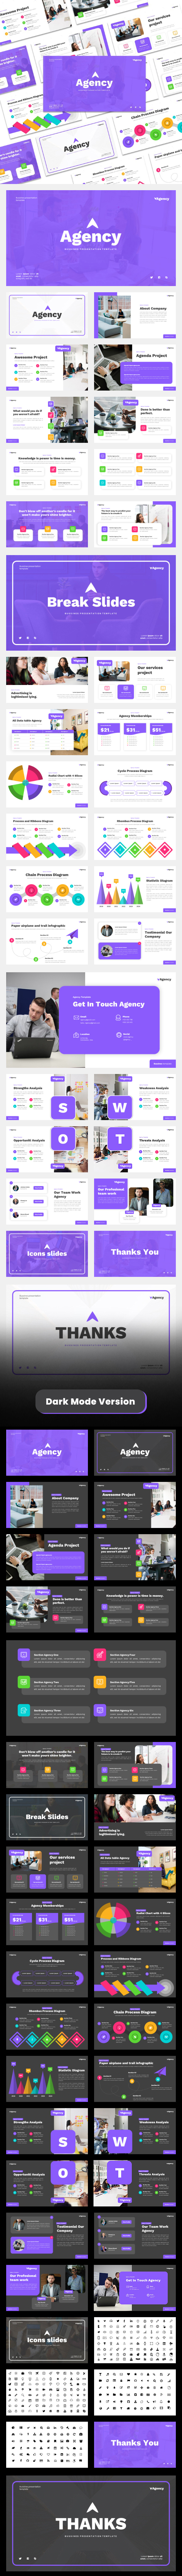 Agency - Business Powerpoint Template